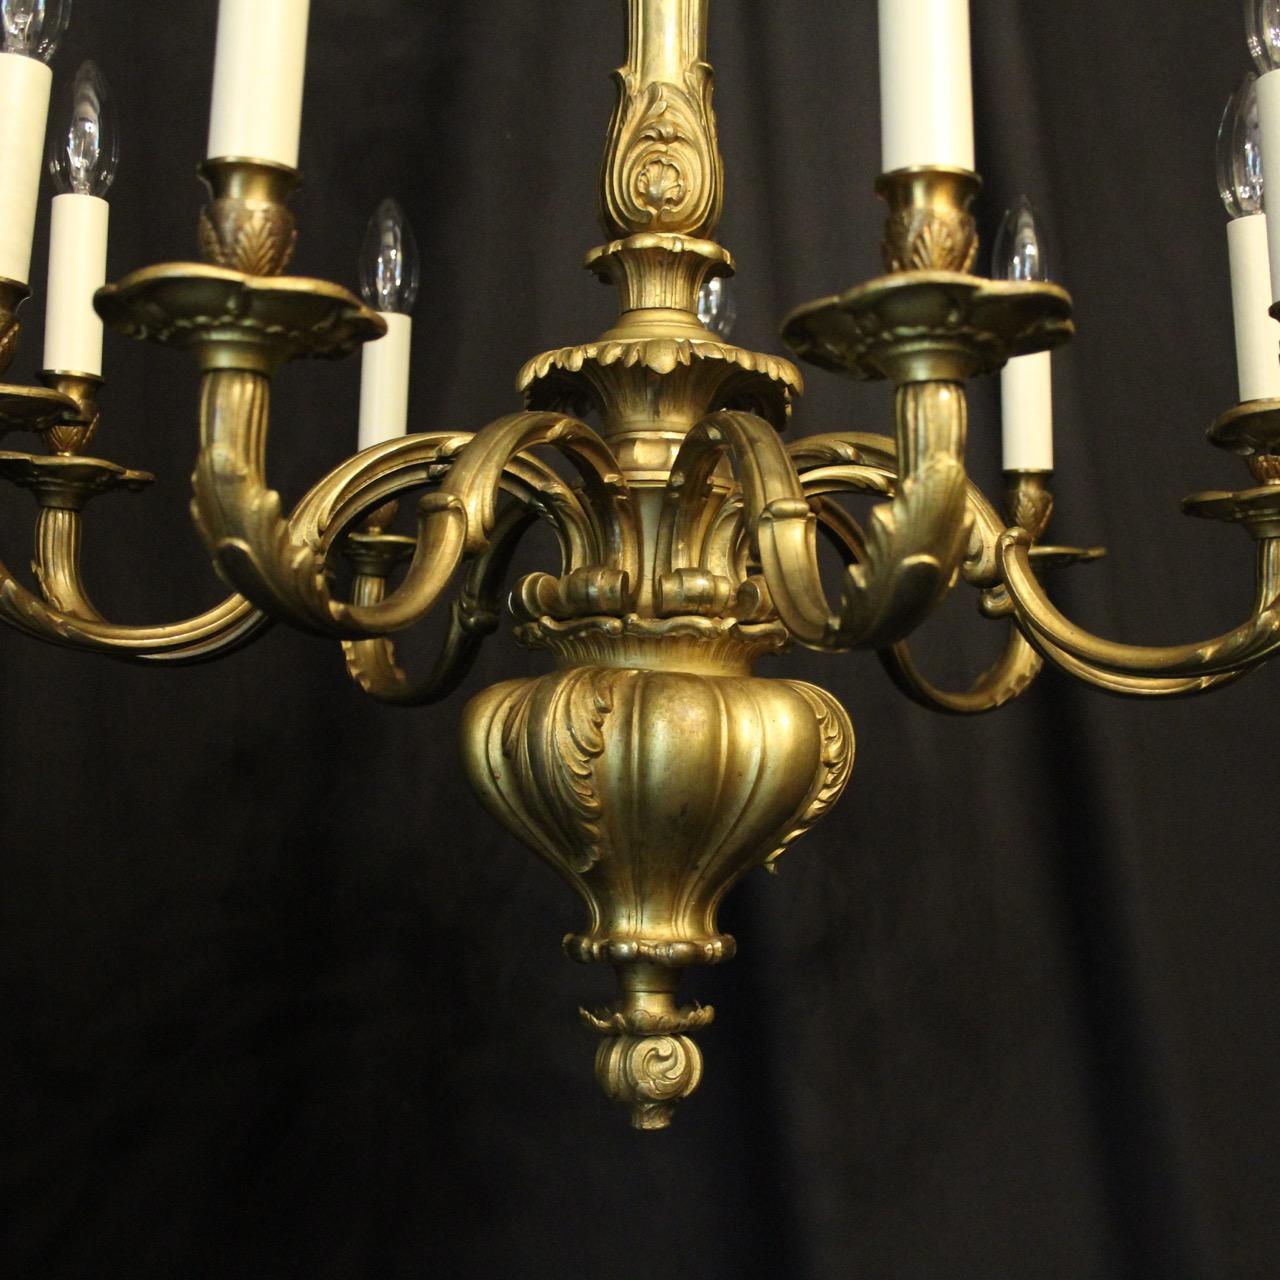 A large English gilded cast bronze eight-light antique chandelier, the reeded ornate leaf scrolling arms with sectional leaf bobeche drip pans and anthemion candle sconces, issuing from a tapering central column with three crisply cast cherub heads